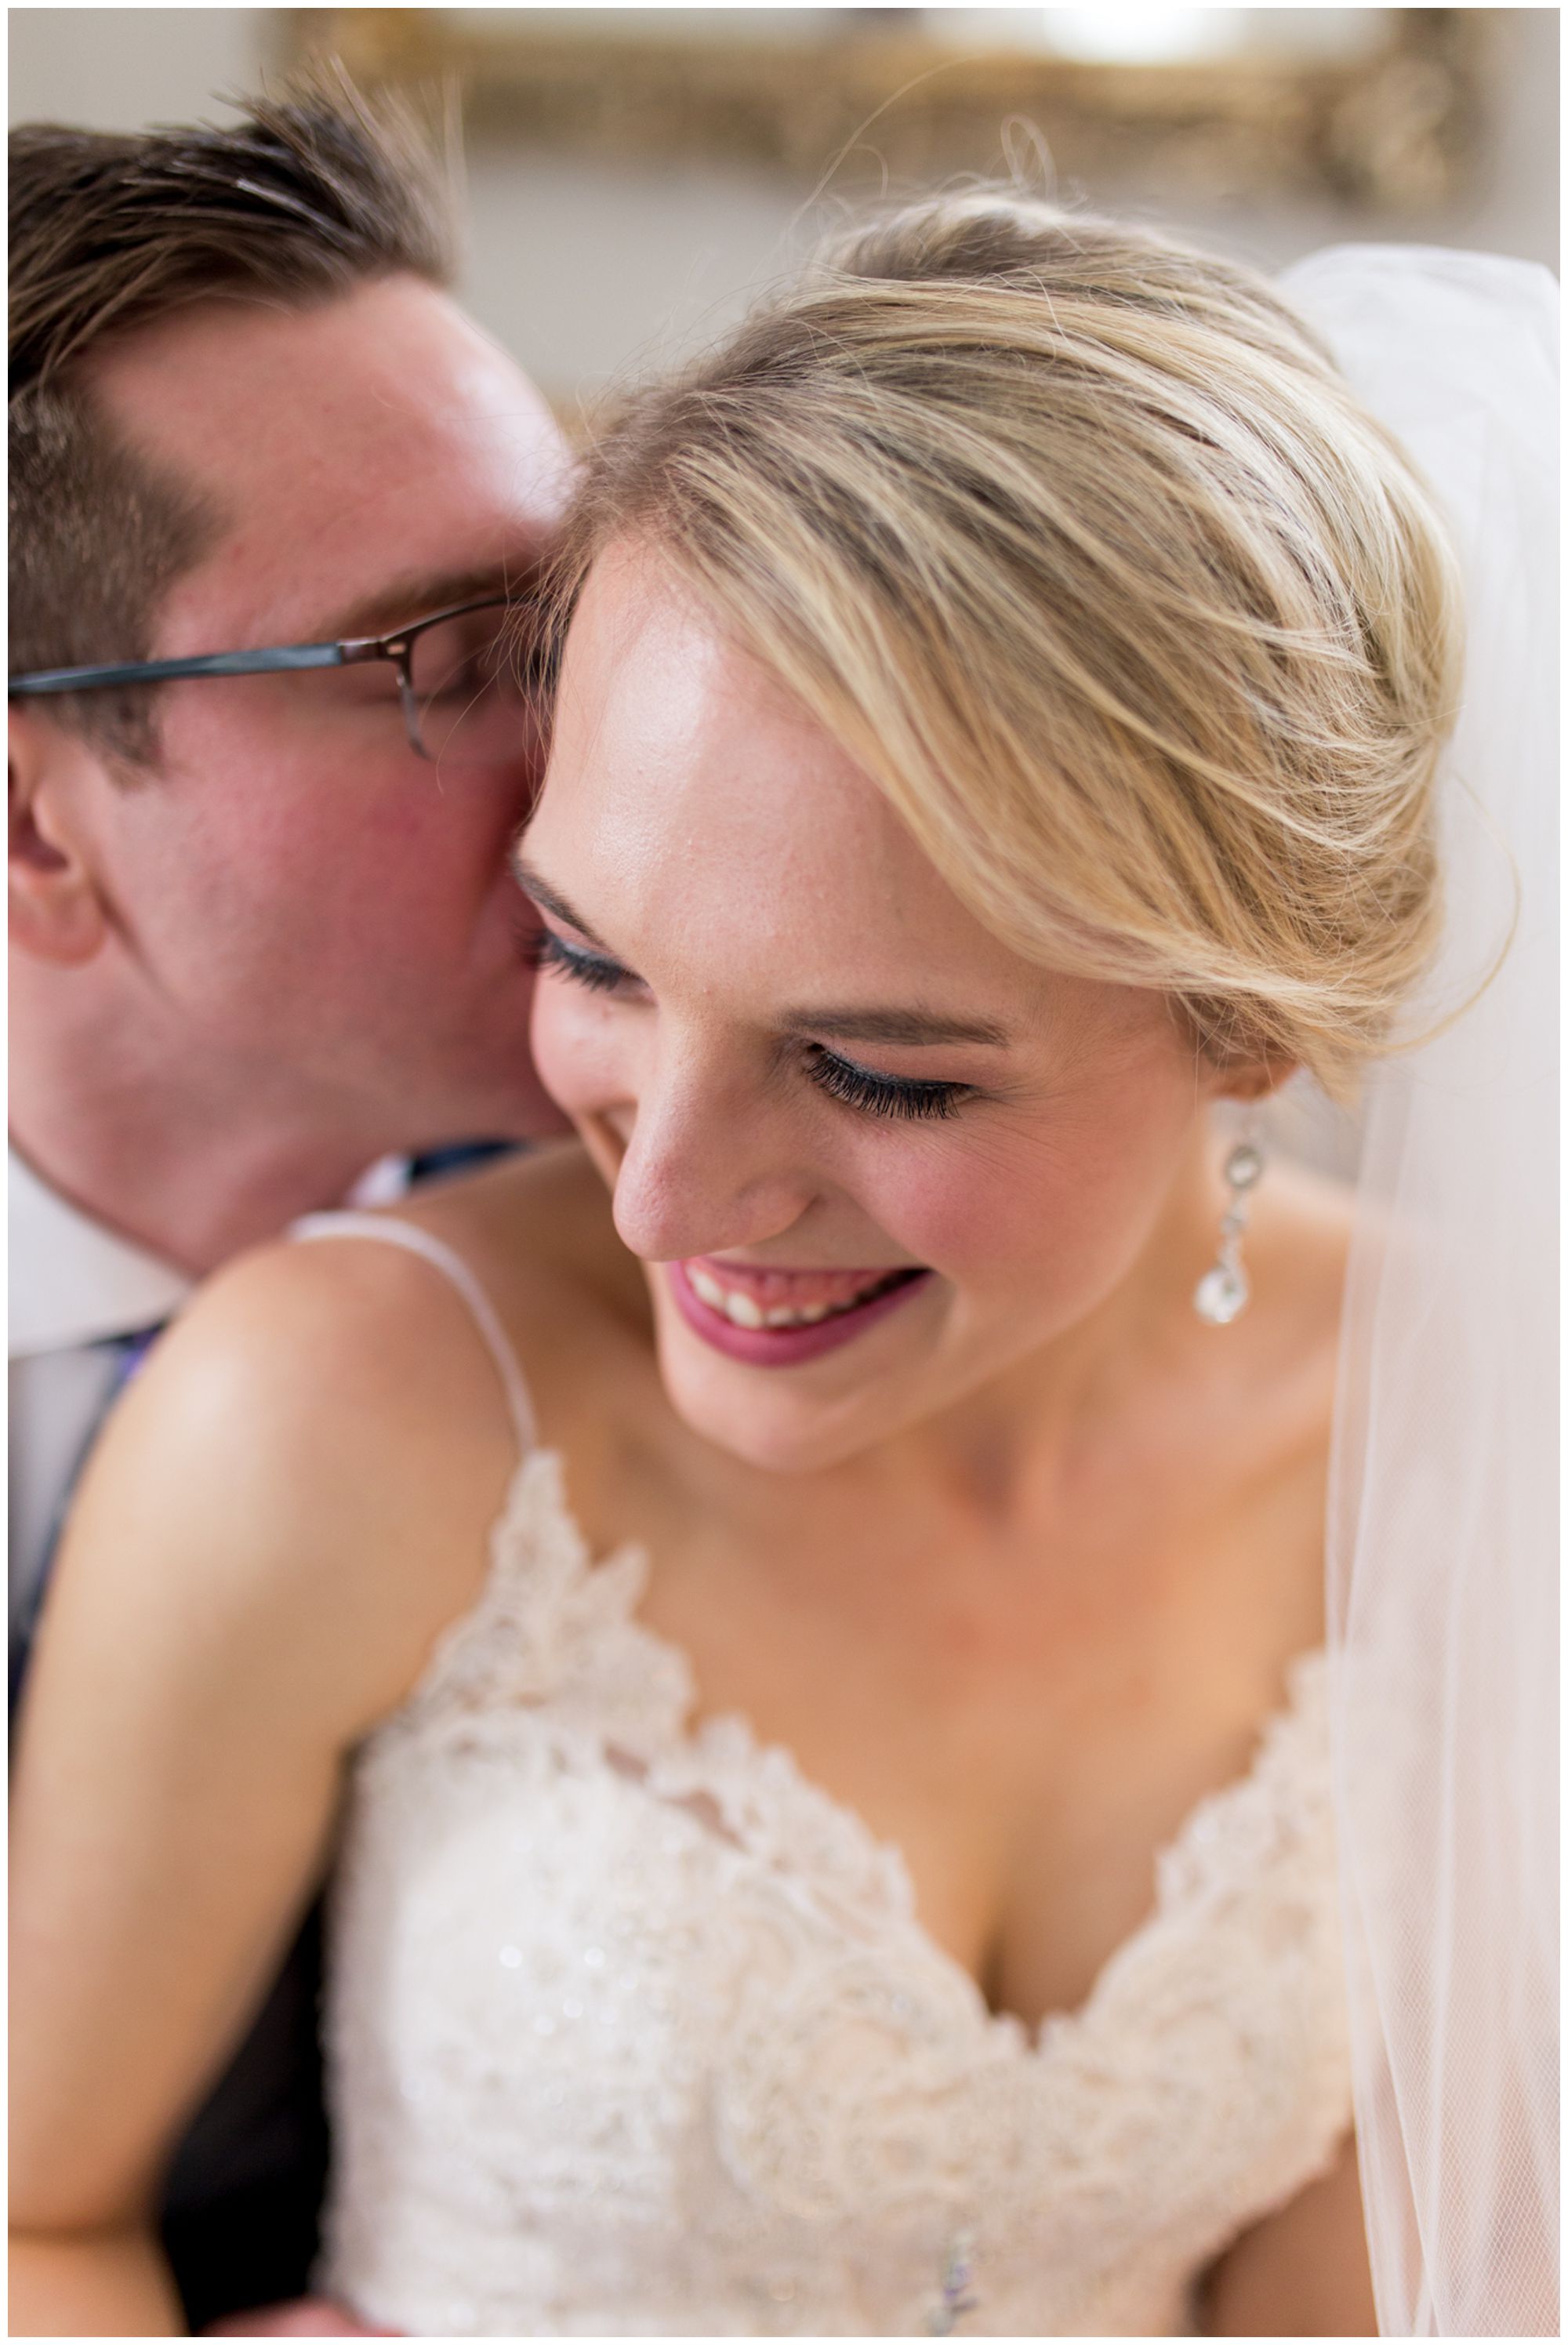 Metsker House bride and groom portraits at Mustard Seed Gardens wedding in Noblesville Indiana